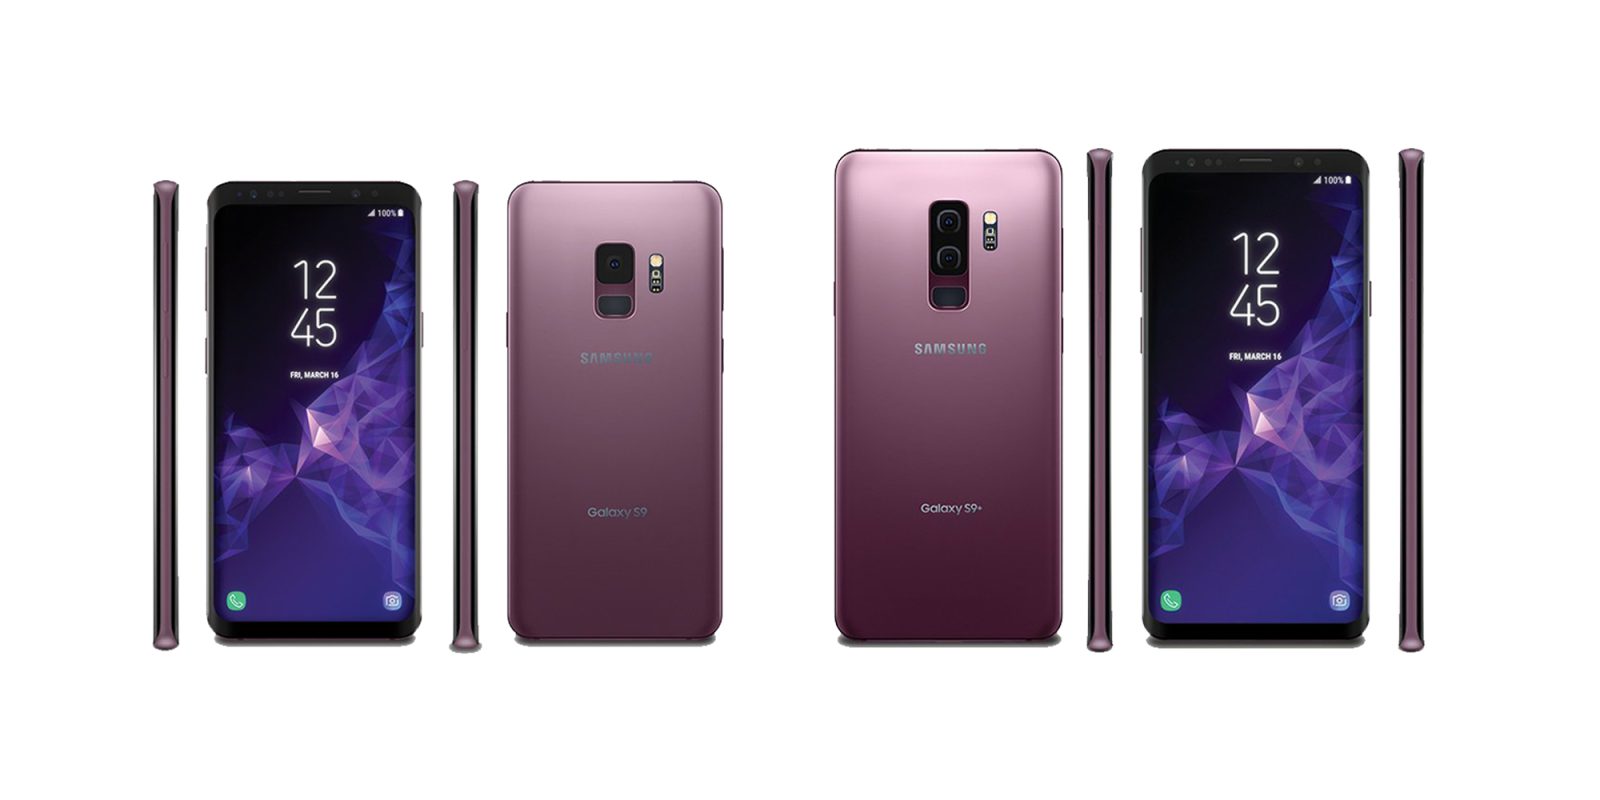 Kenyan pre-orders for Samsung S9 and S9+set to open this week